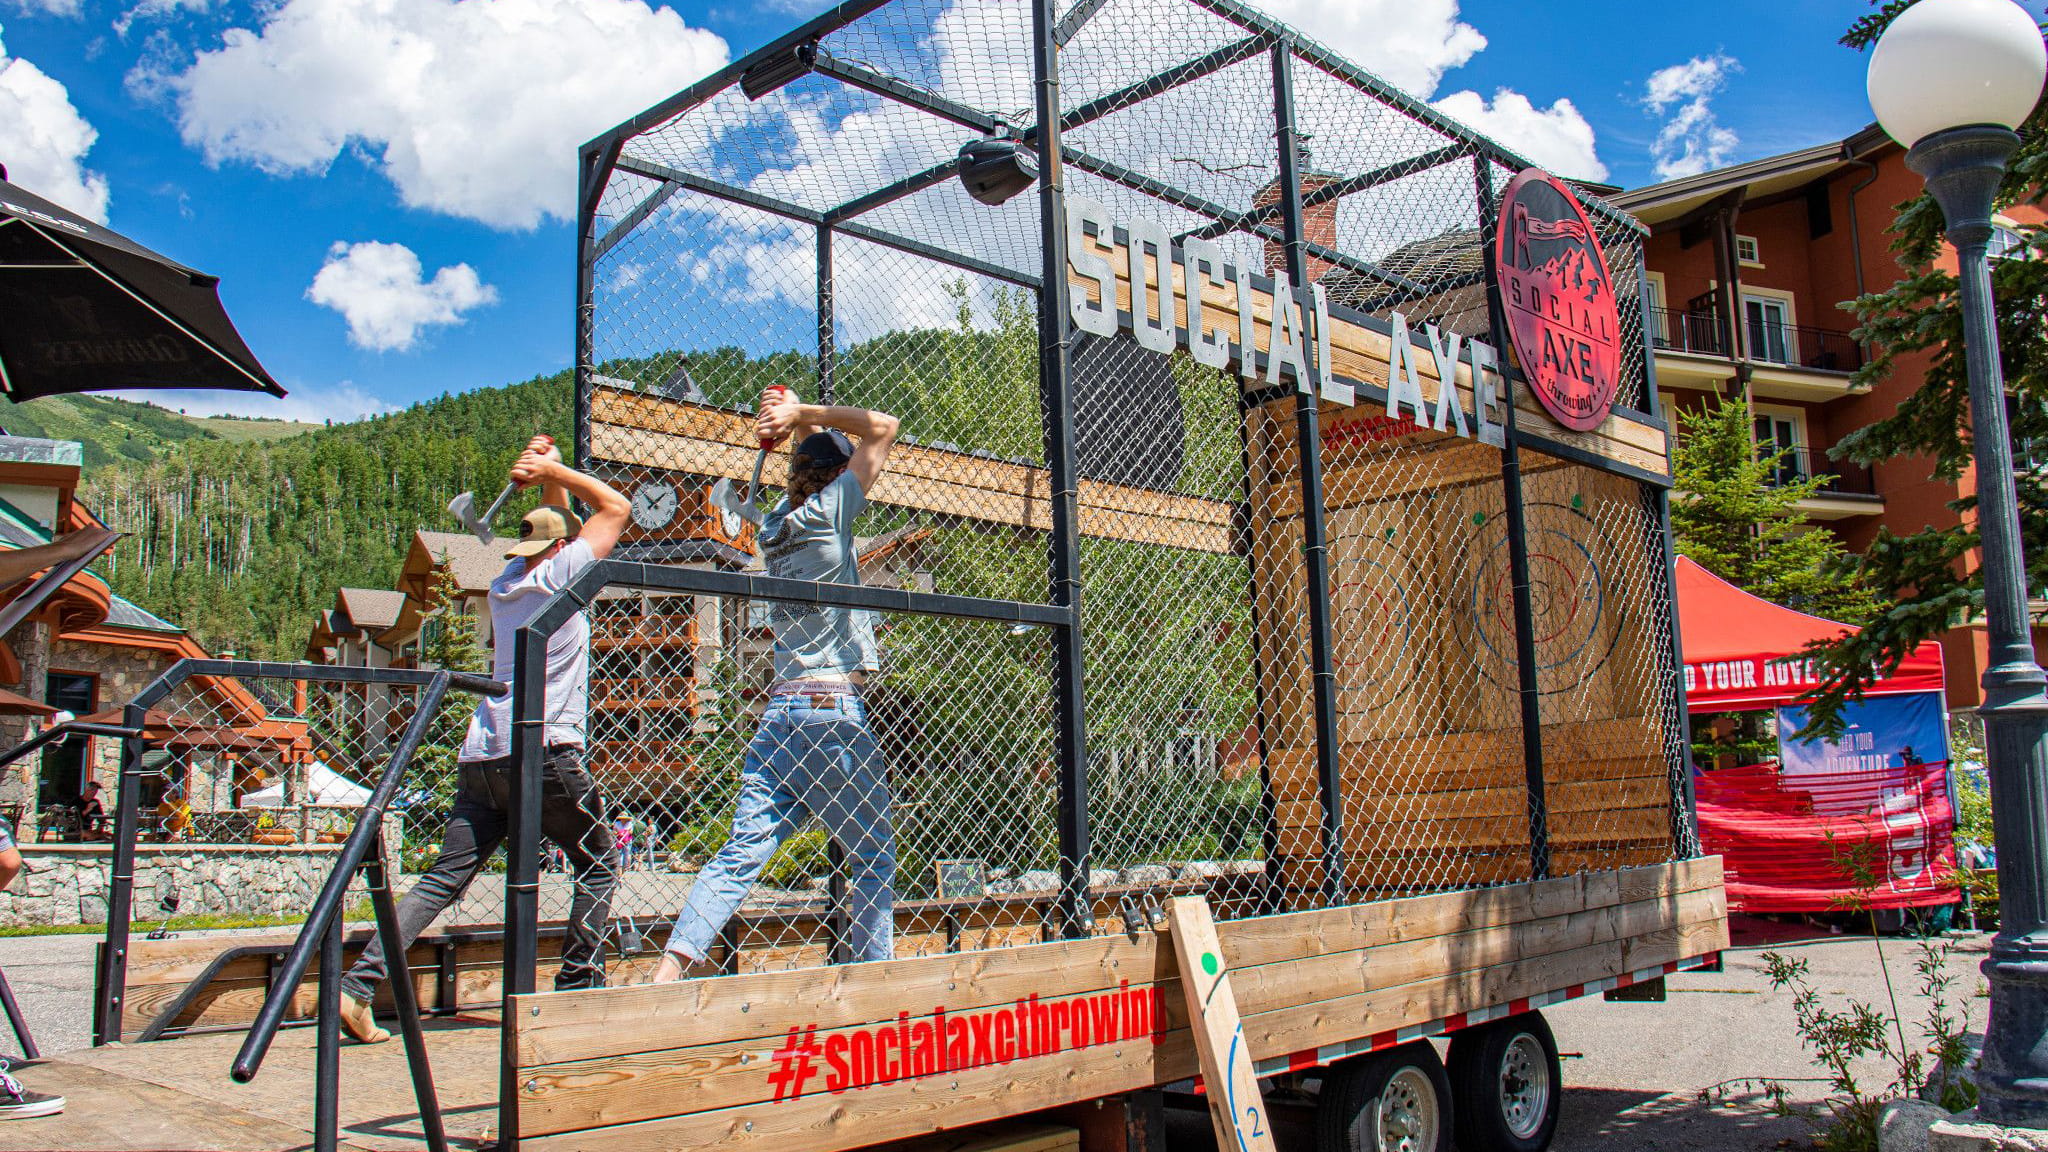 Social axe throwing during Summer Fest 2019 at Solitude Mountain Resort